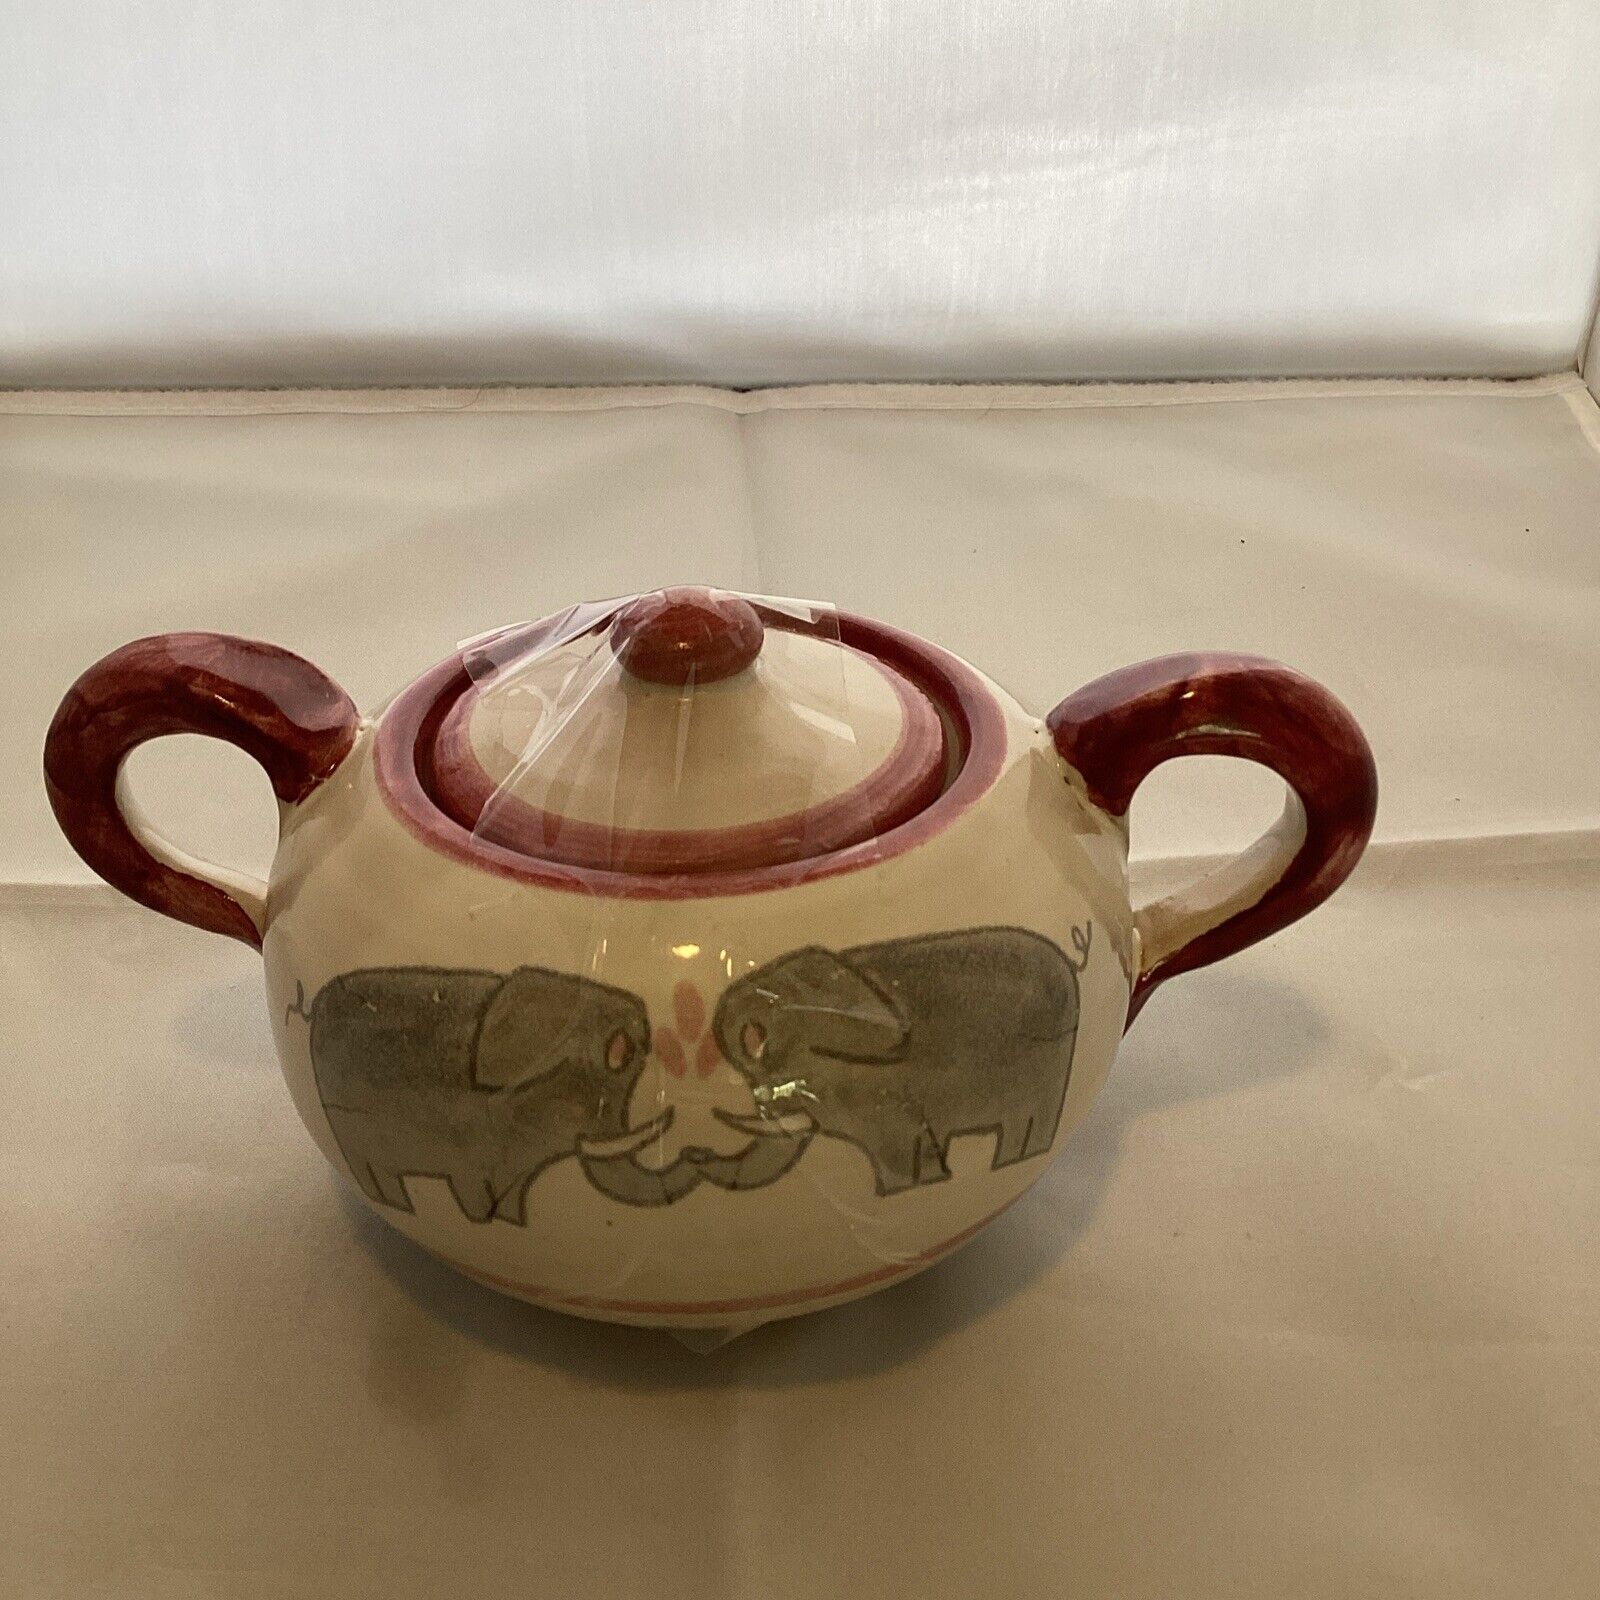 Italian Pottery Sugar Bowl With Double Handles Lid And A Pair Of Elephants